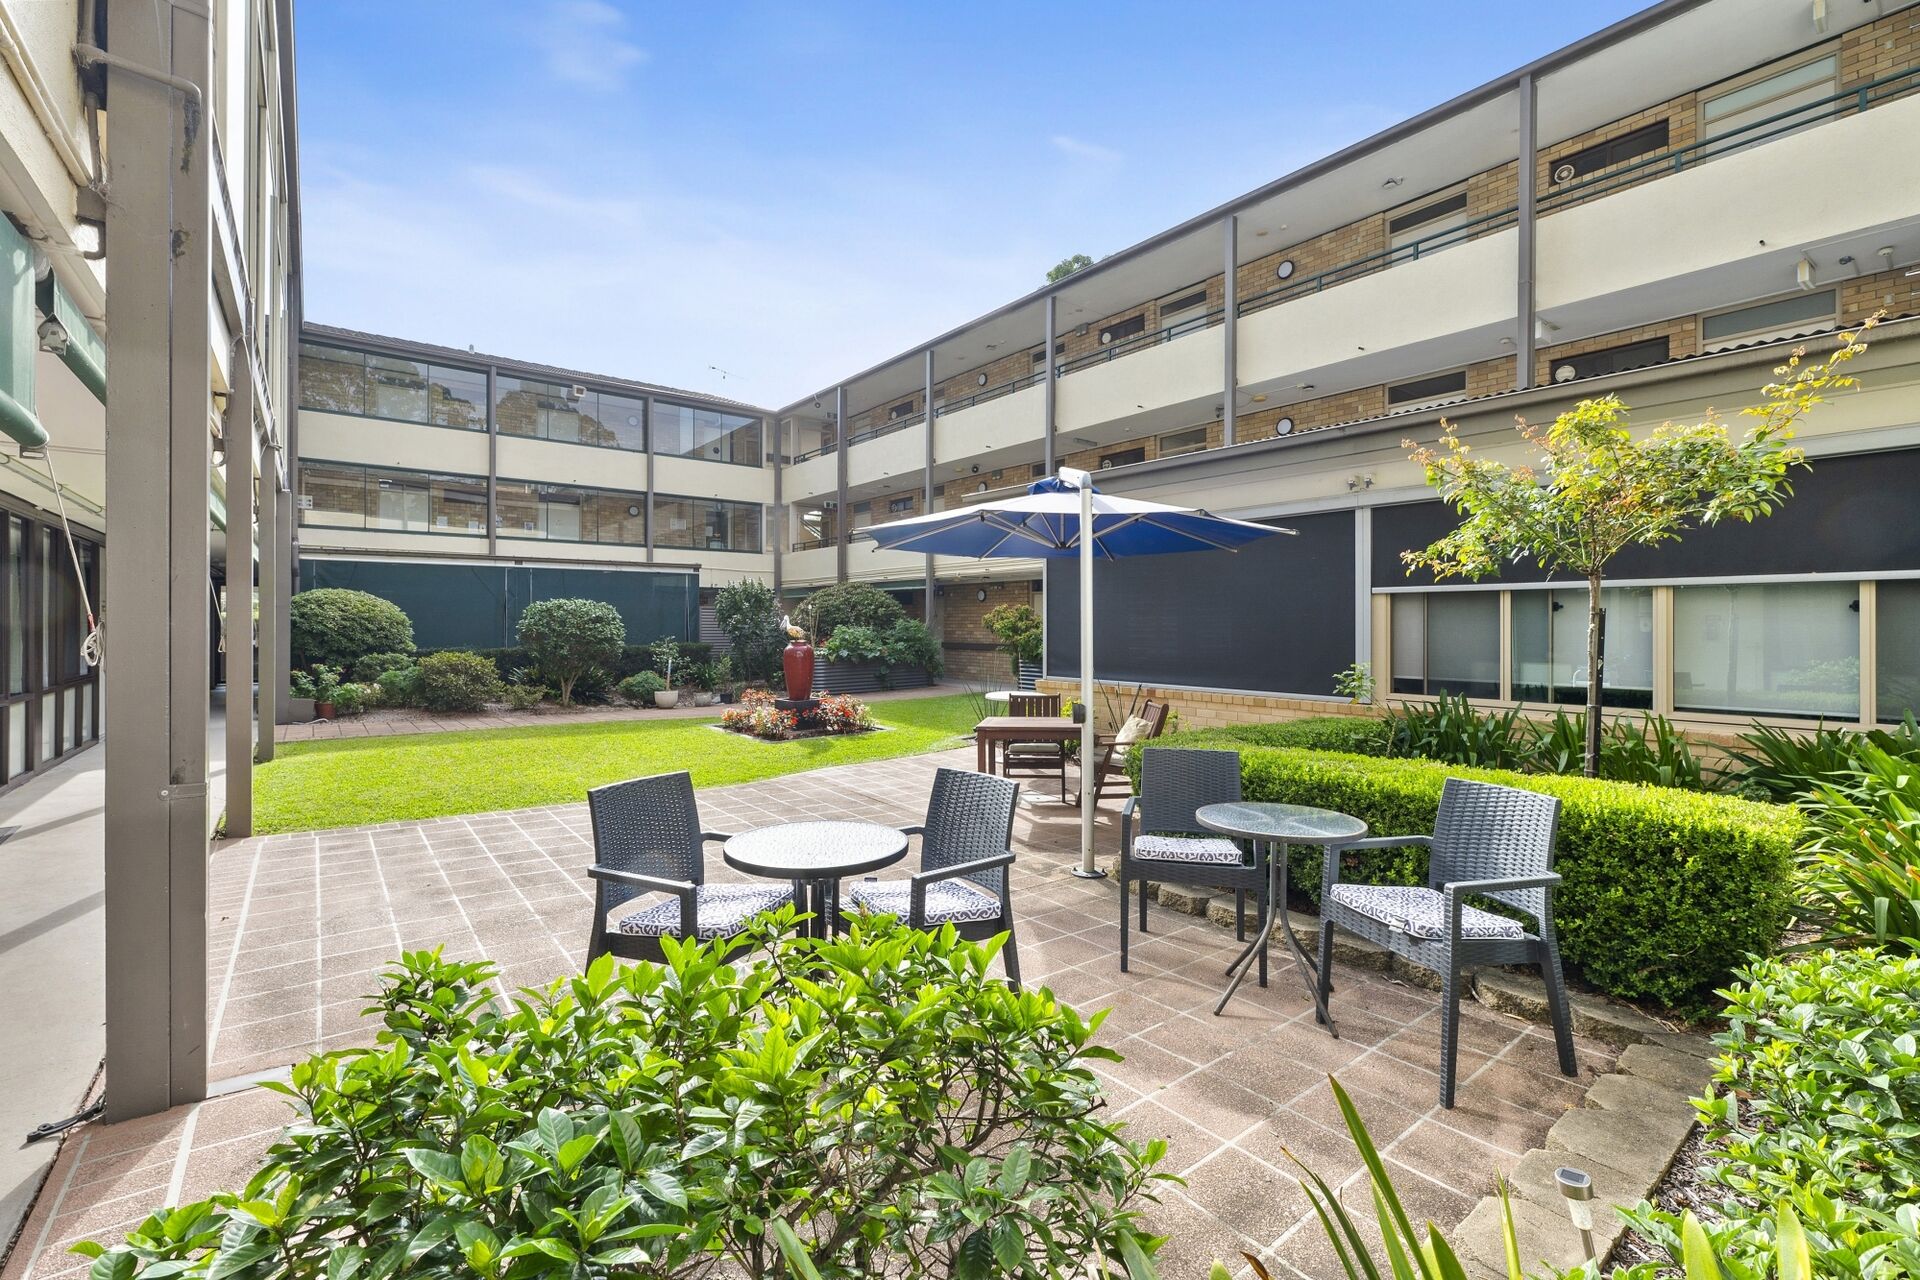 Outdoor areas for aged care residents to socialise at baptistcare cooinda court residential aged care home in macquarie park northern sydney